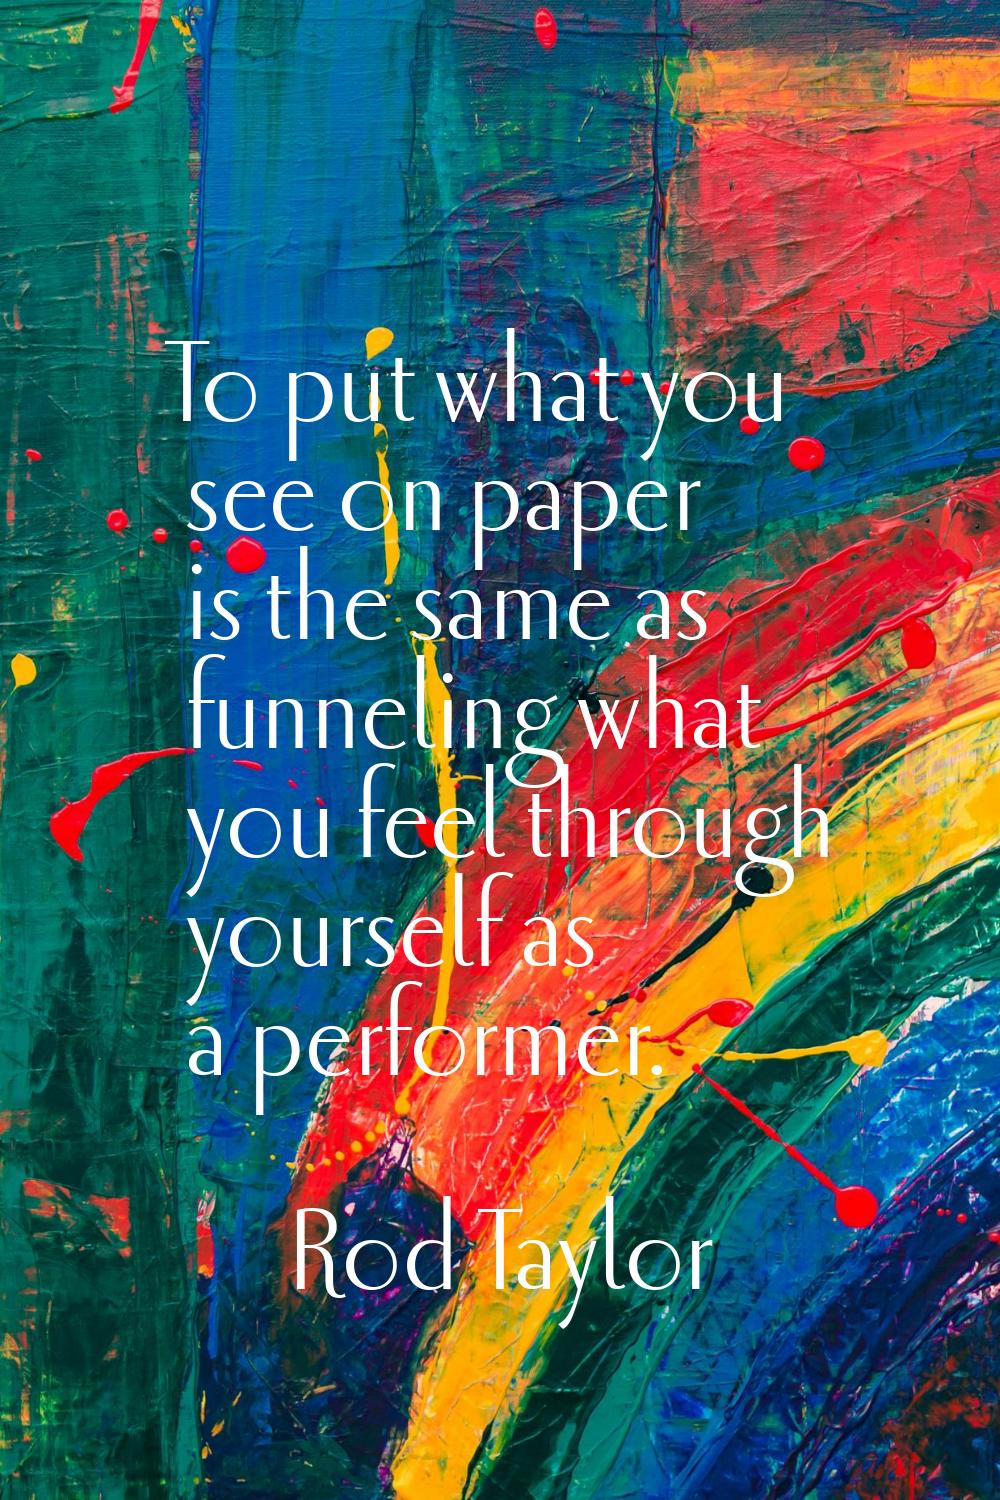 To put what you see on paper is the same as funneling what you feel through yourself as a performer